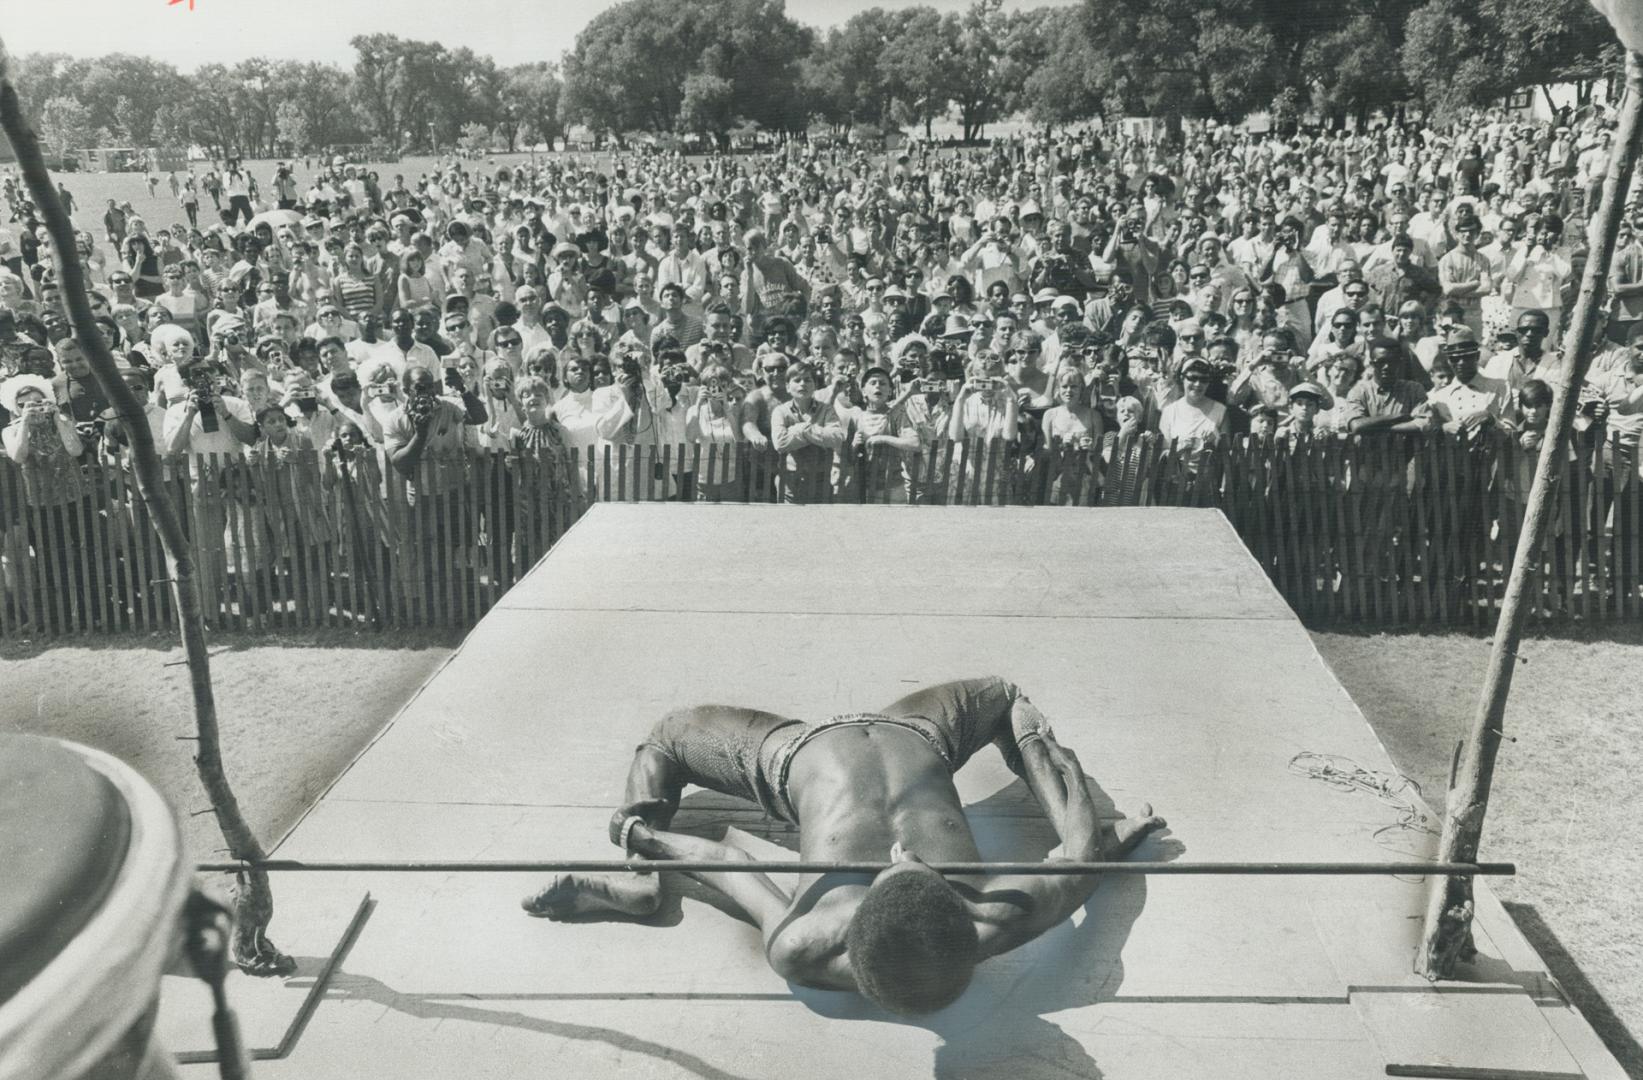 Limbo Dancer thrilled thousands of Toronto citizens during Caribana '67 on the Island